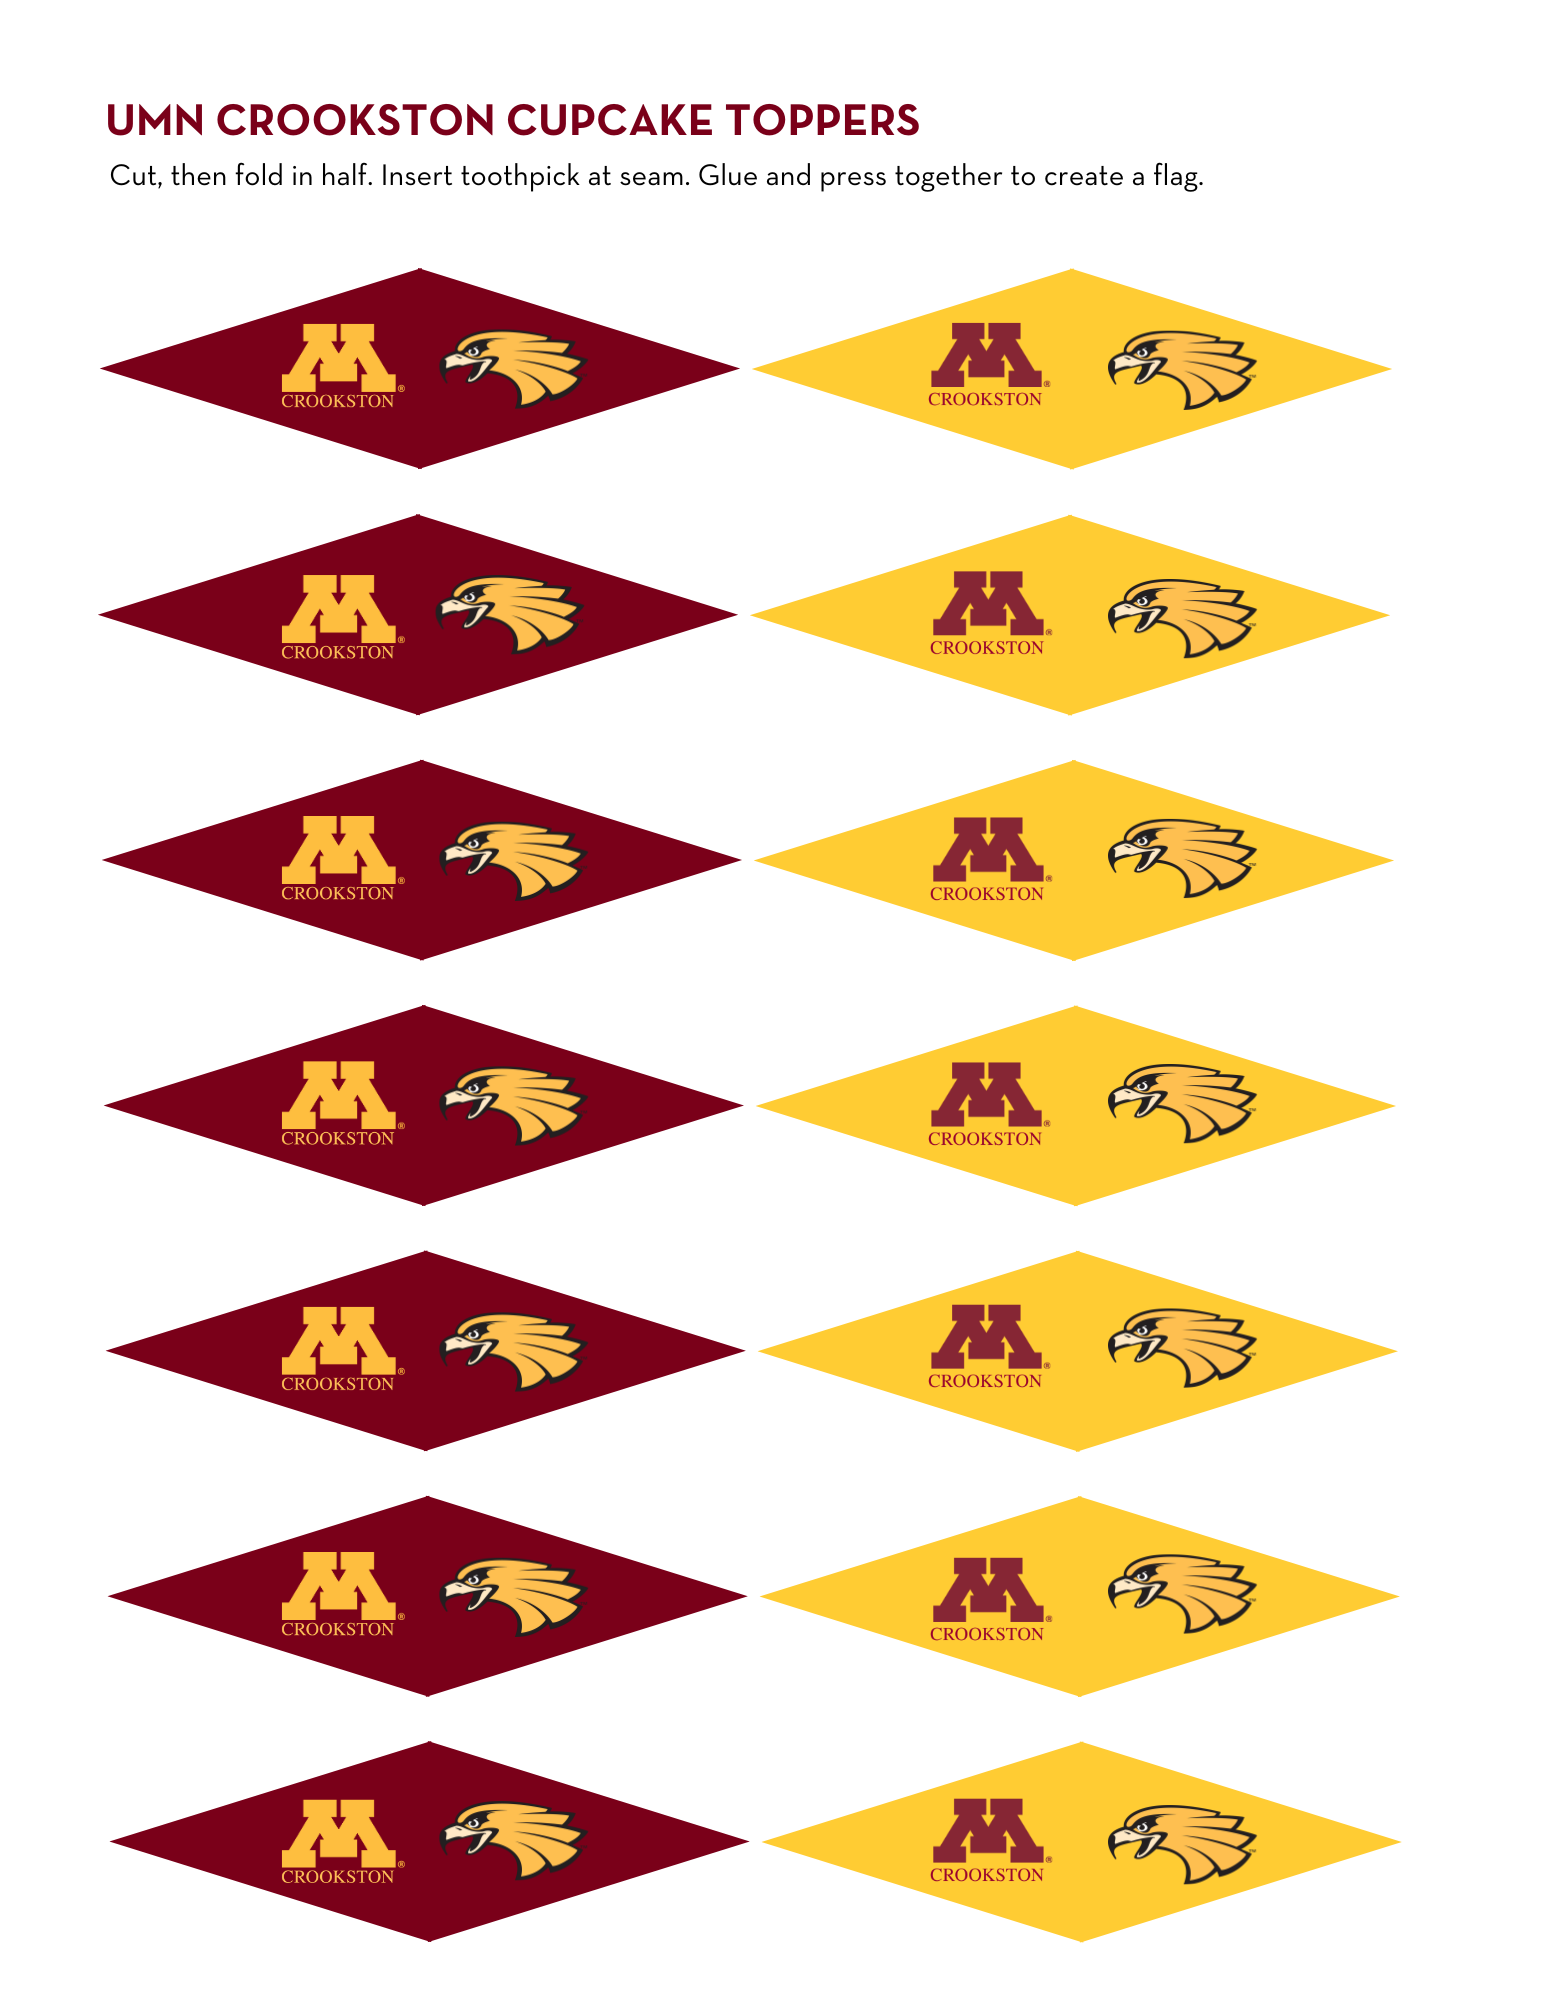 Cupcake toppers - UMN Crookston and Golden Eagle - Maroon and Gold